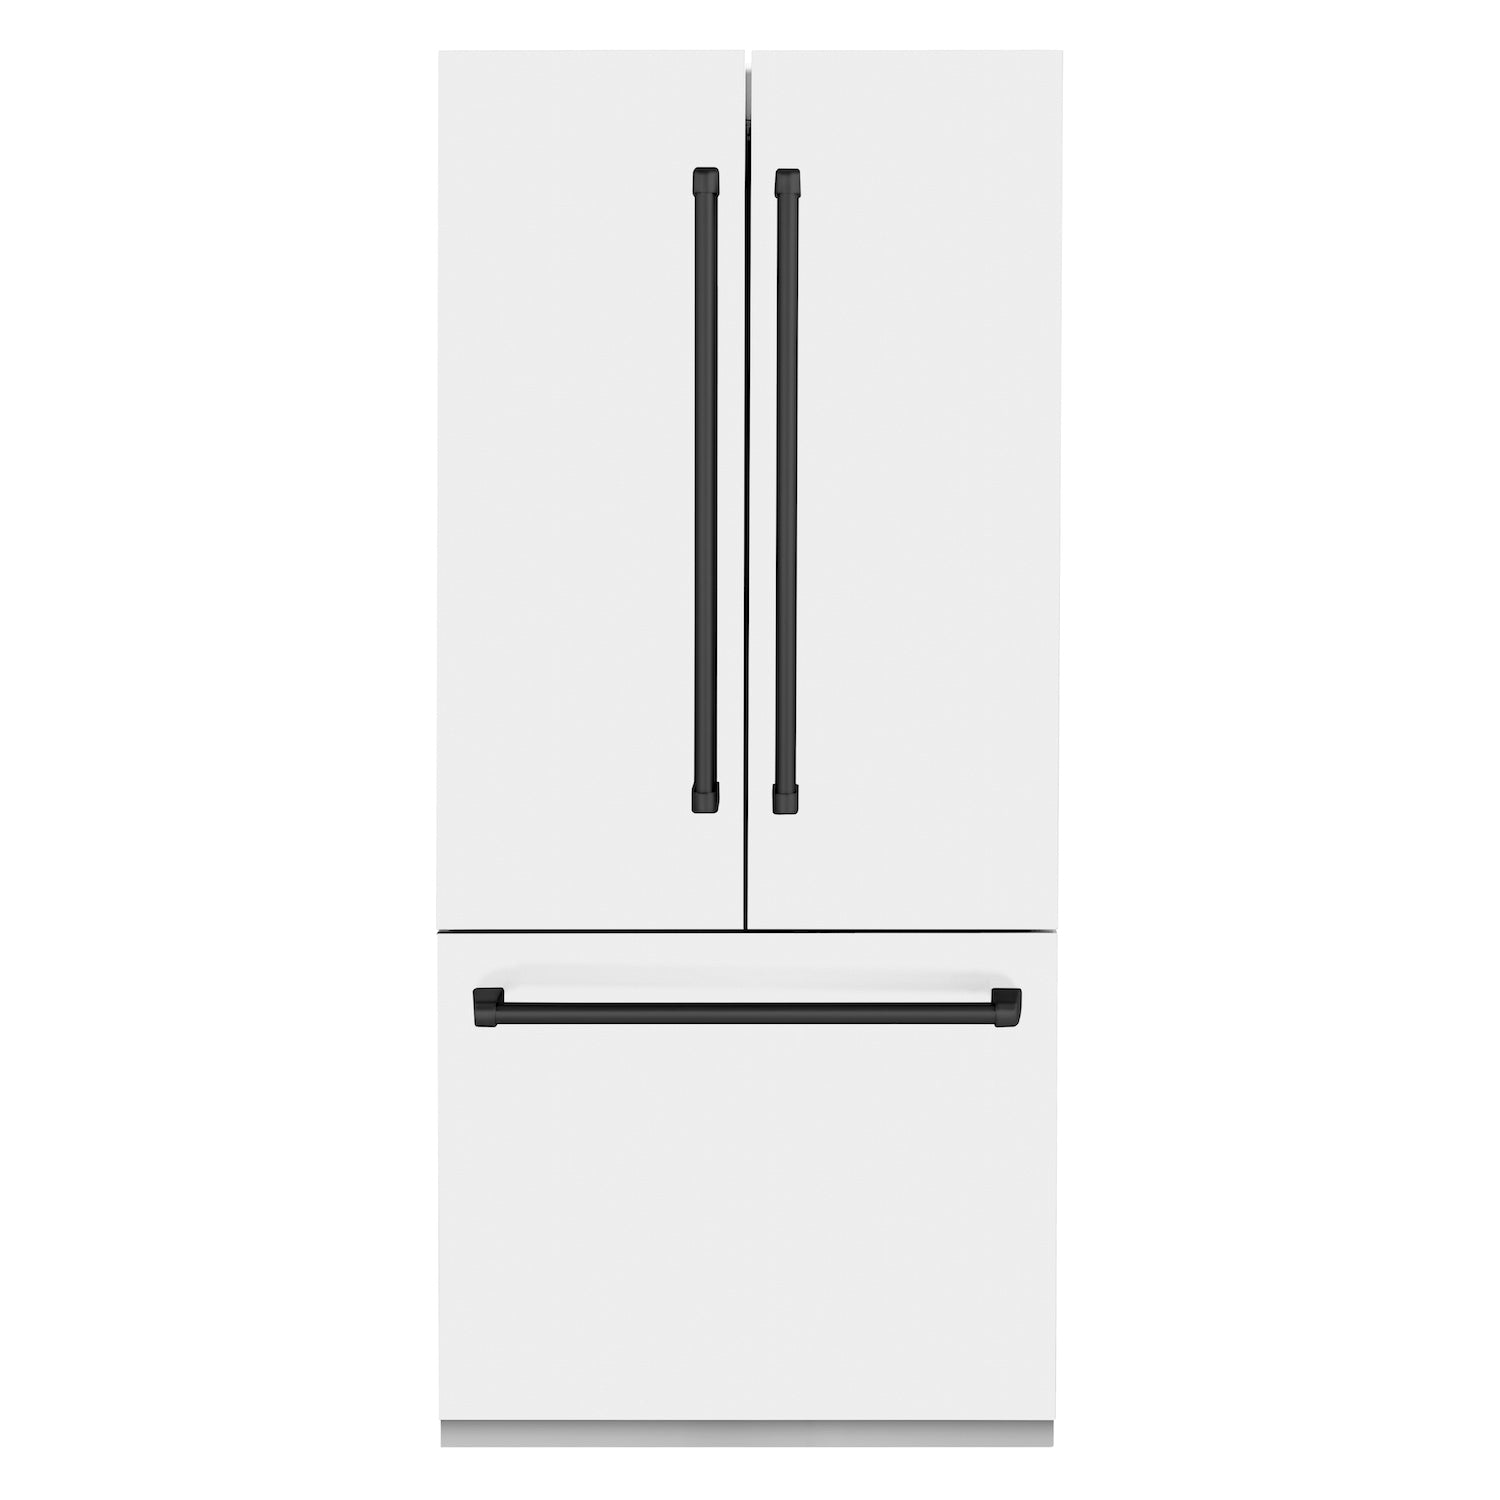 ZLINE Autograph Edition 36 in. 19.6 cu. ft. Built-in 2-Door Bottom Freezer Refrigerator with Internal Water and Ice Dispenser in White Matte with Matte Black Accents (RBIVZ-WM-36-MB) front, closed.